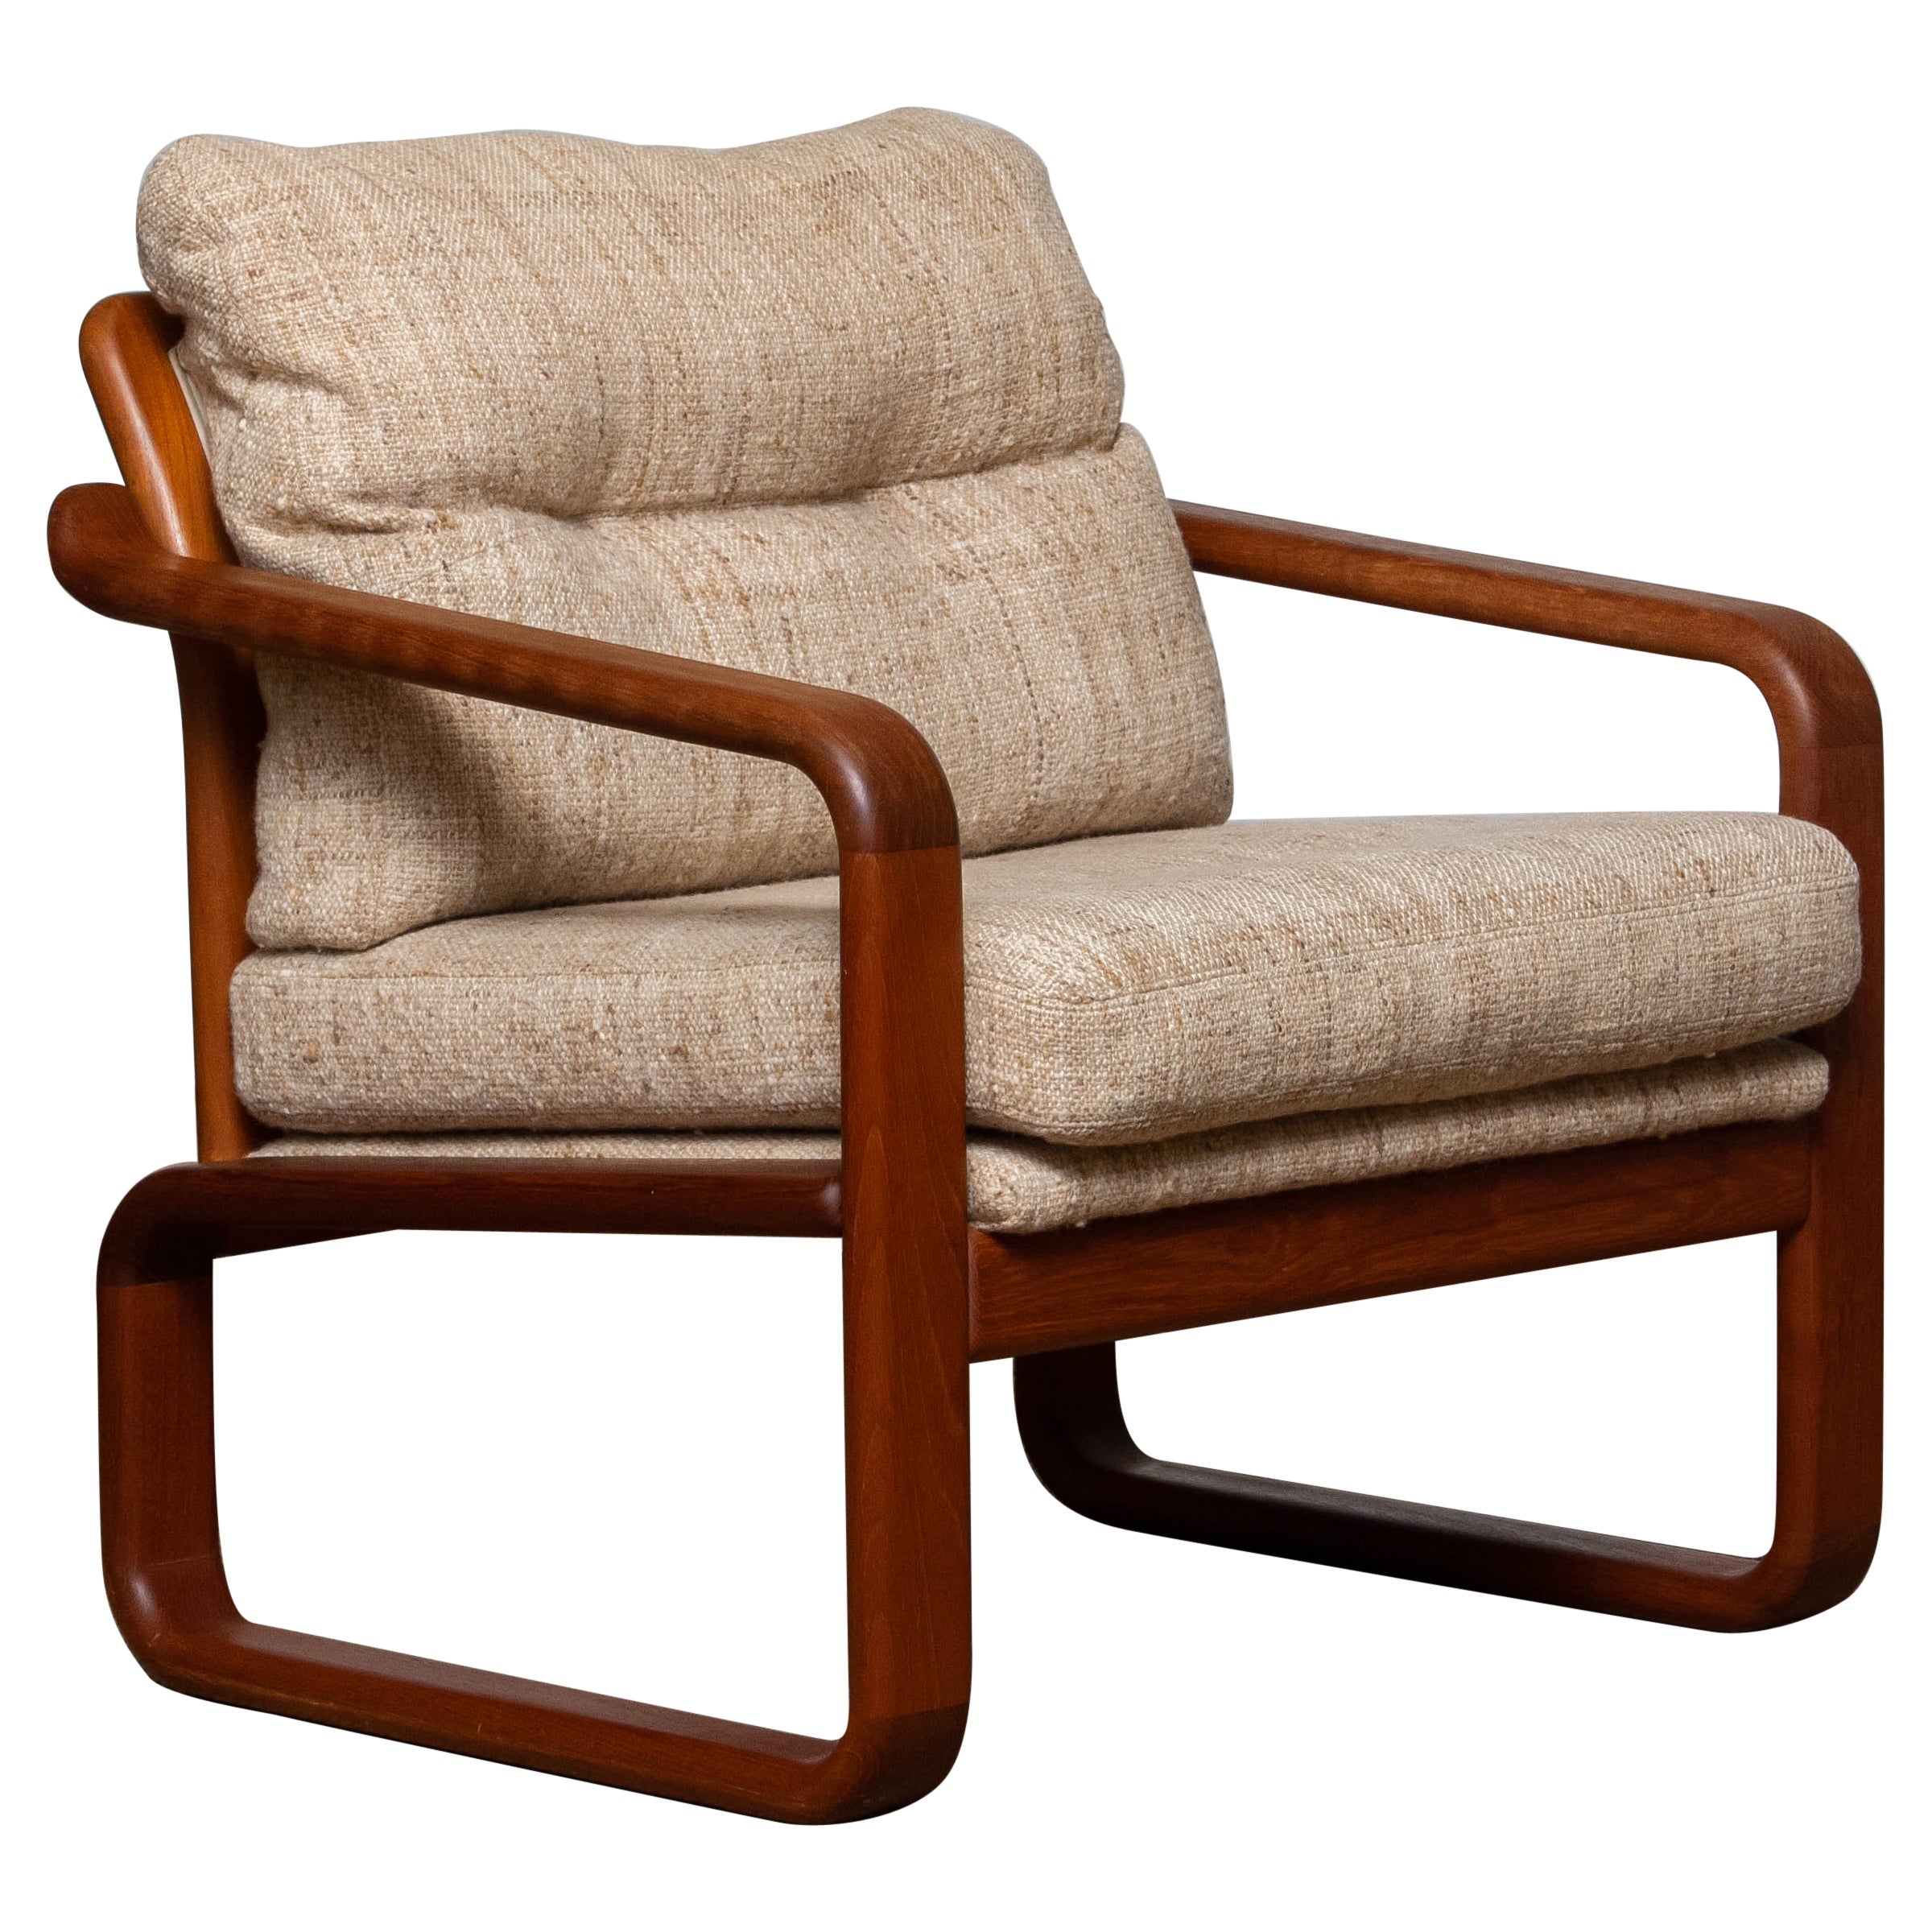 1980's Teak with Wool Cushions Lounge / Easy / Club Chair by HS Design Denmark For Sale